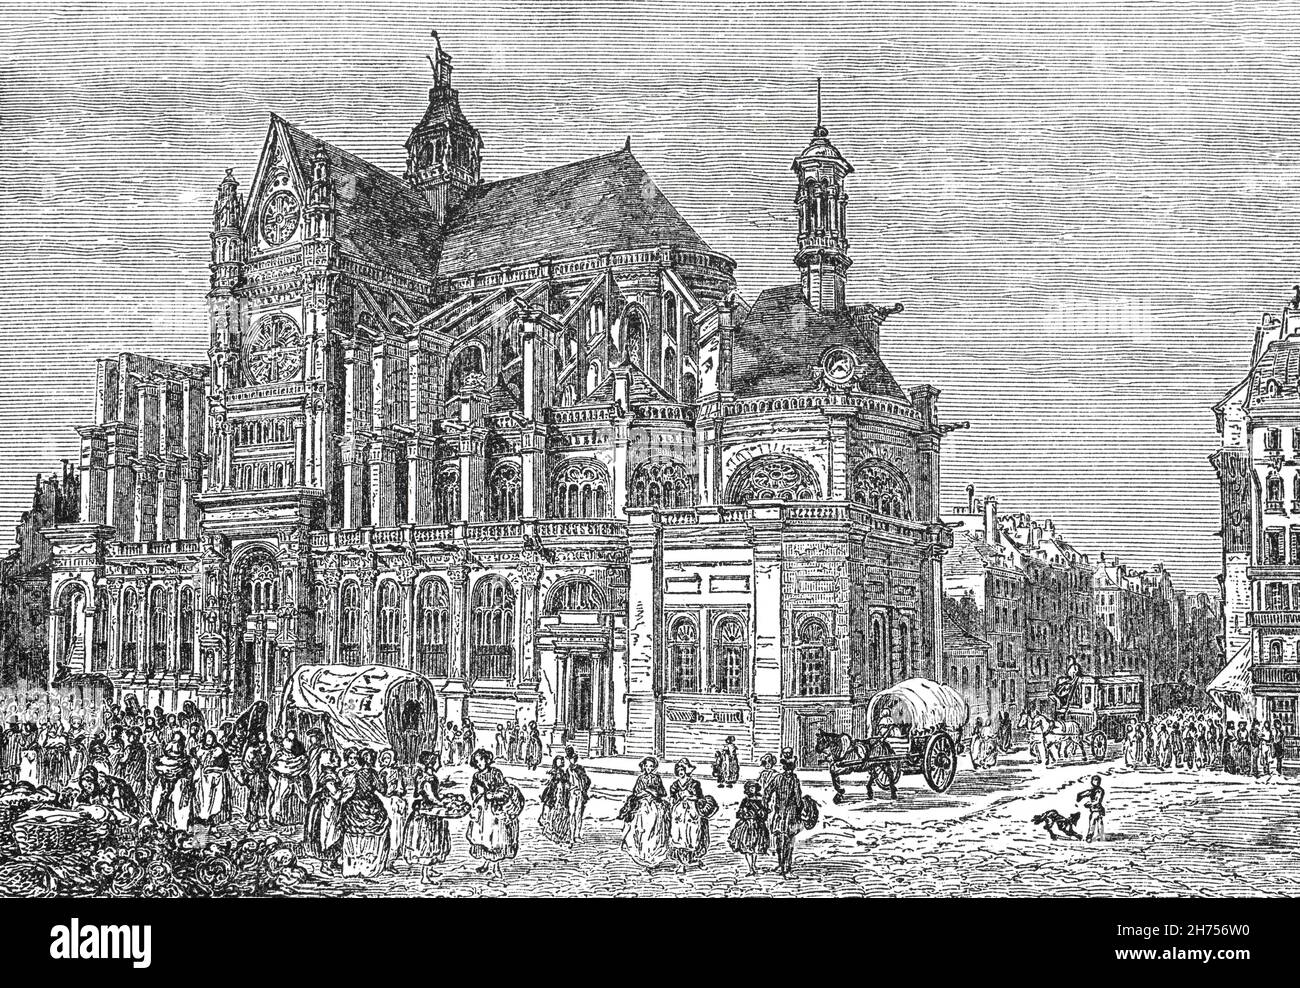 A late 19th Century illustration of the Church of St. Eustache in the 1st arrondissement of Paris, built between 1532 and 1632. Situated near the site of Paris' medieval marketplace (Les Halles), Saint-Eustache exemplifies a mixture of multiple architectural styles: its structure is Gothic while its interior decoration and other details are Renaissance and classical. Stock Photo